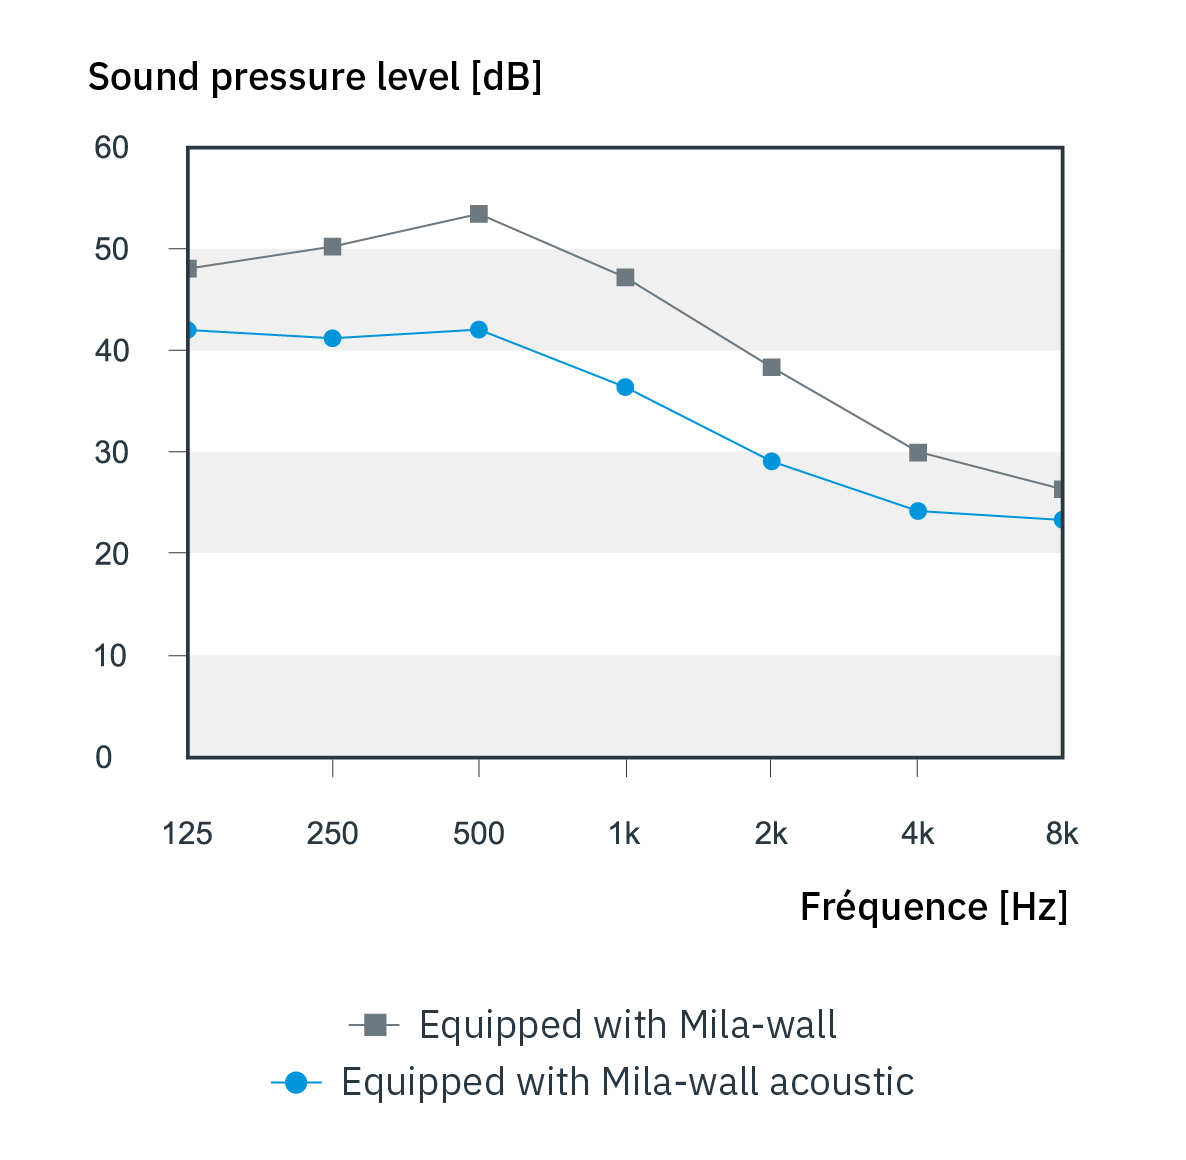 Diagram showing the sound pressure level when using Mila-wall and Mila-wall Acoustic